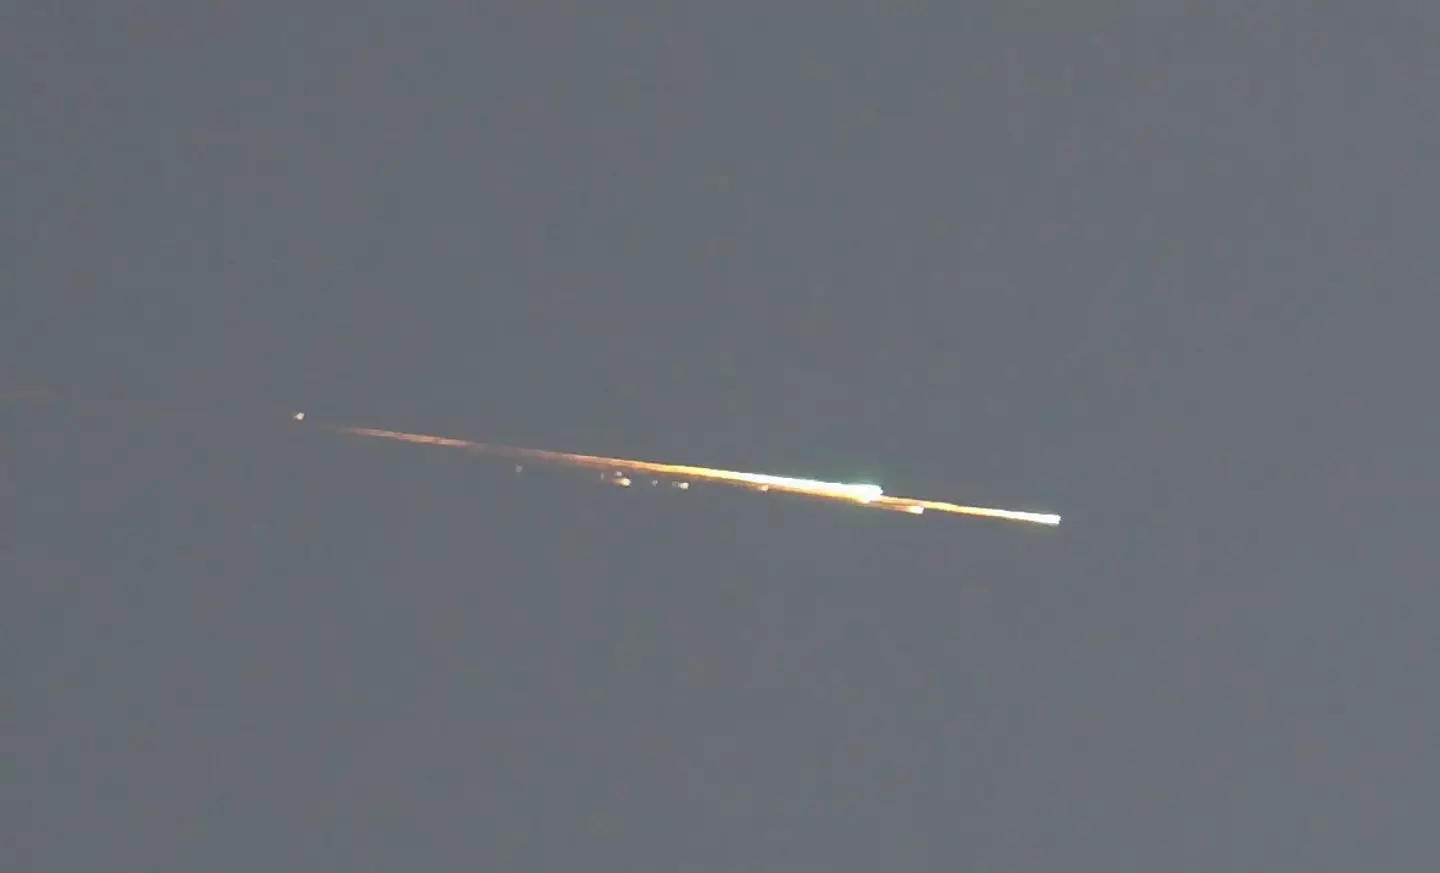 The Ursid Meteor is an annual event.